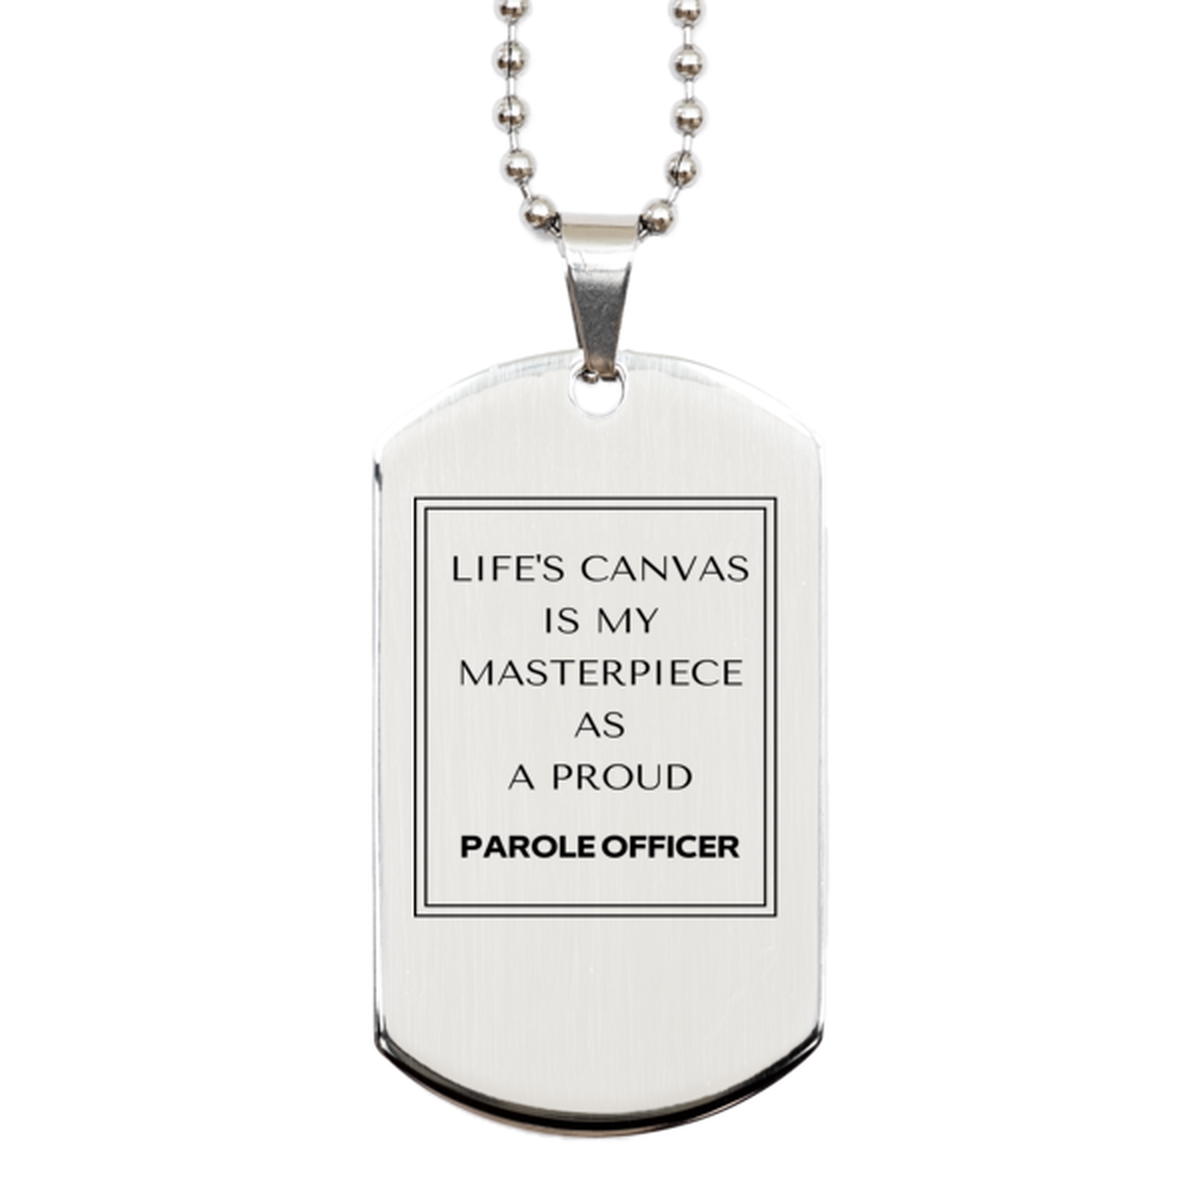 Proud Parole Officer Gifts, Life's canvas is my masterpiece, Epic Birthday Christmas Unique Silver Dog Tag For Parole Officer, Coworkers, Men, Women, Friends